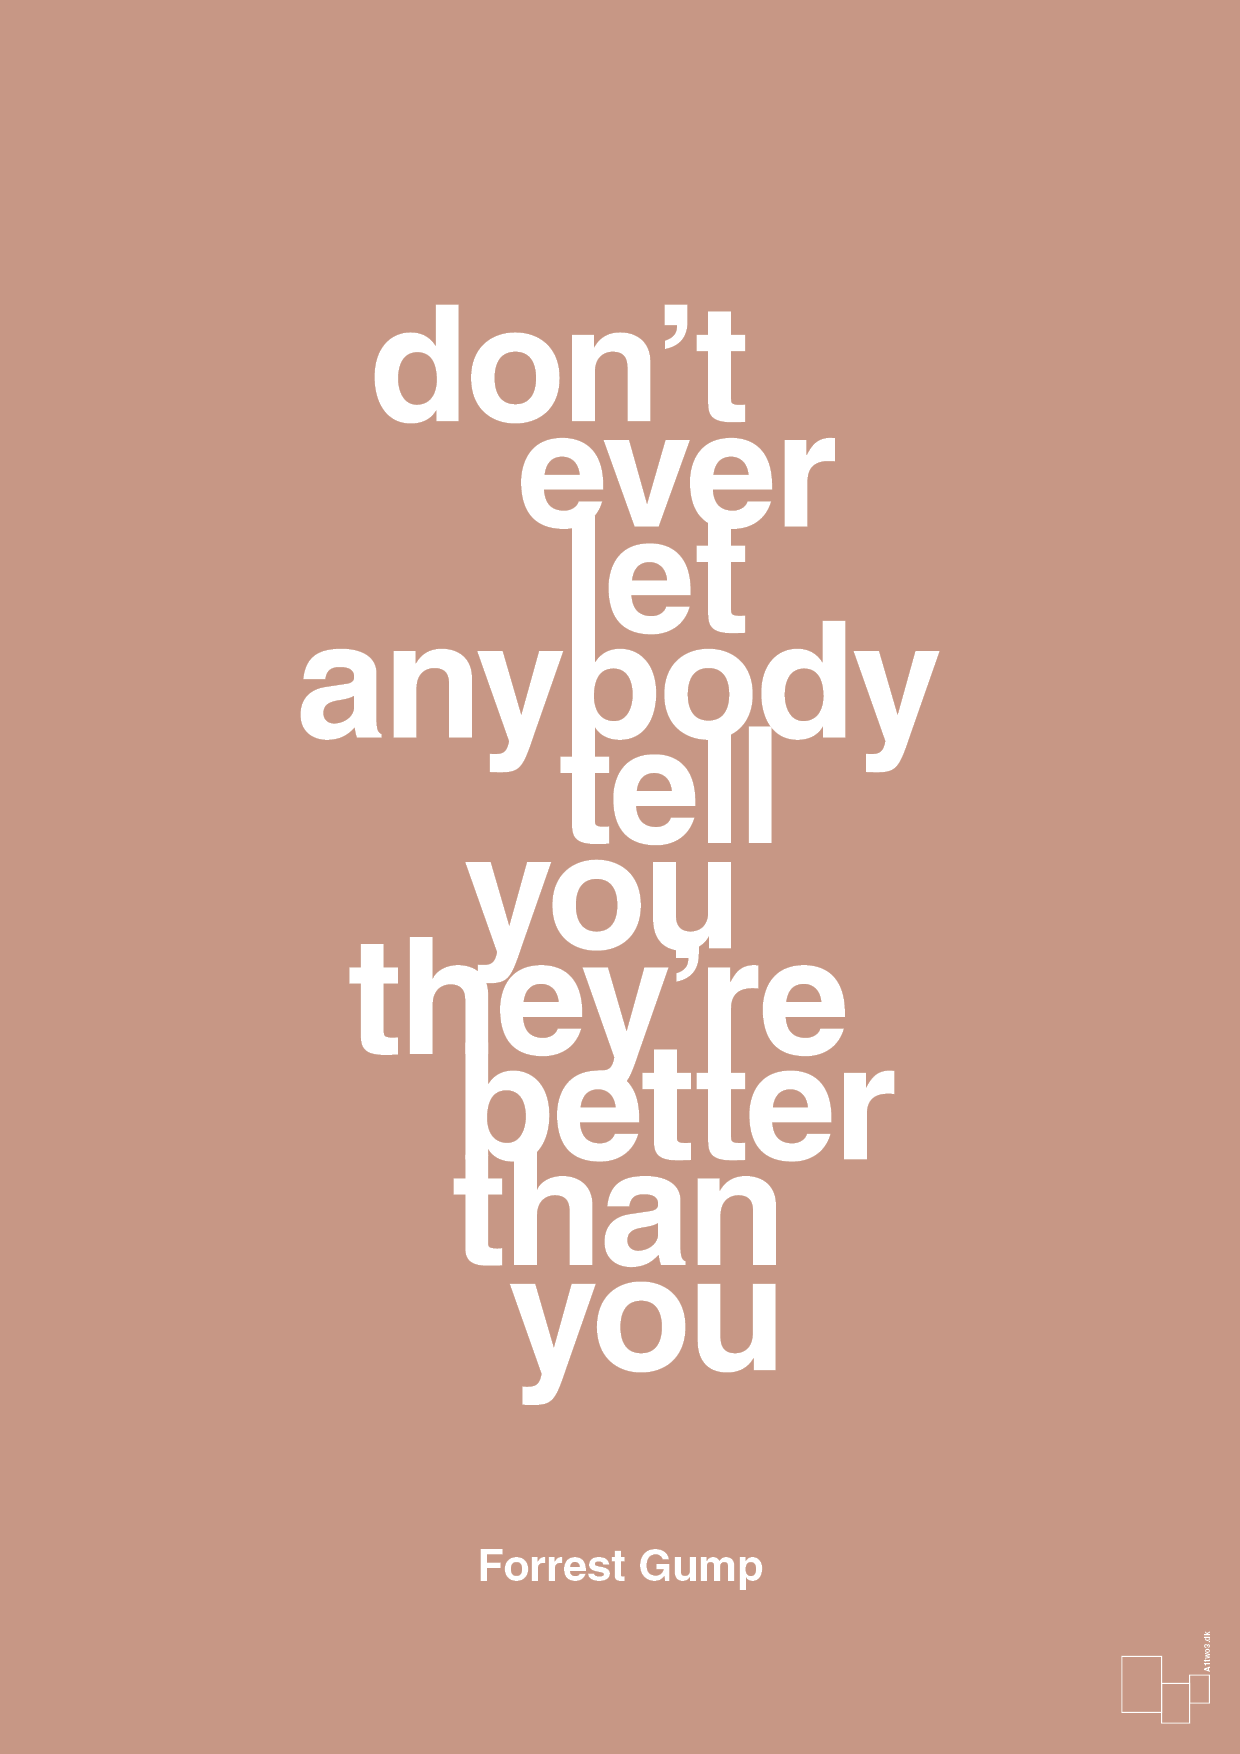 don’t ever let anybody tell you they’re better than you - Plakat med Citater i Powder